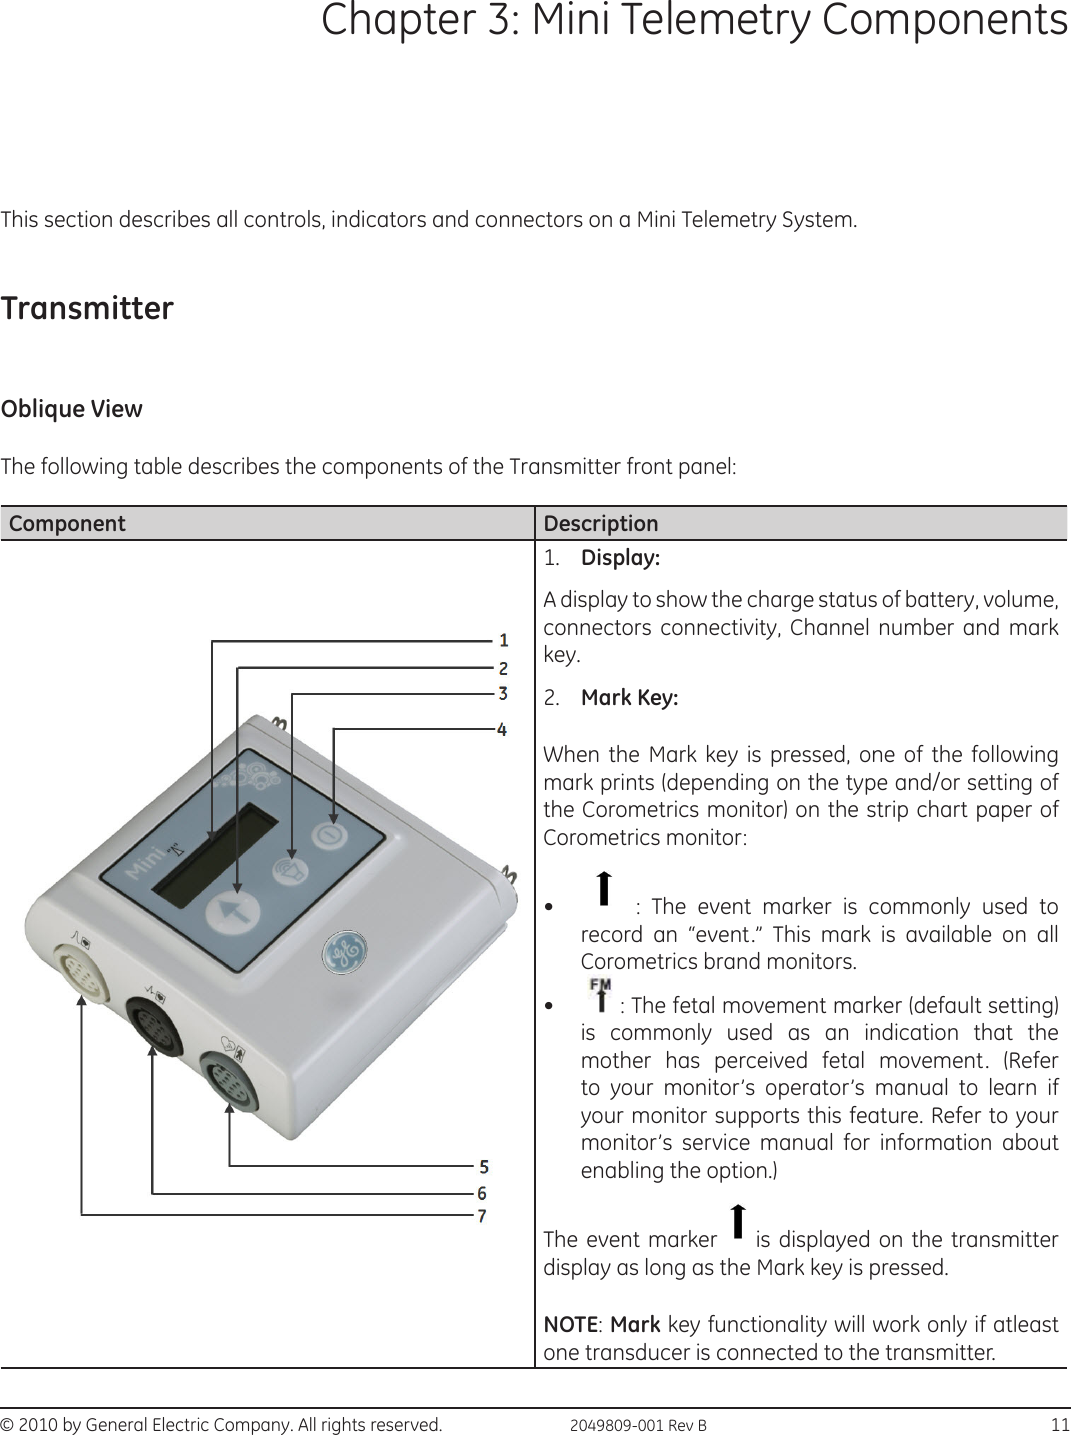 © 2010 by General Electric Company. All rights reserved.  2049809-001 Rev B                                                                               11Chapter 3: Mini Telemetry ComponentsThis section describes all controls, indicators and connectors on a Mini Telemetry System.Transmitter Oblique ViewThe following table describes the components of the Transmitter front panel:Component Description1.  Display:A display to show the charge status of battery, volume, connectors connectivity, Channel number and mark key.2.  Mark Key: When the Mark key is pressed, one of the following mark prints (depending on the type and/or setting of the Corometrics monitor) on the strip chart paper of Corometrics monitor:•       :  The  event  marker  is  commonly  used  to record an “event.” This mark is available on all Corometrics brand monitors.•    : The fetal movement marker (default setting) is commonly used as an indication that the mother has perceived fetal movement. (Refer to your monitor’s operator’s manual to learn if your monitor supports this feature. Refer to your monitor’s service manual for information about enabling the option.)The event marker   is displayed on the transmitter display as long as the Mark key is pressed.NOTE: Mark key functionality will work only if atleast one transducer is connected to the transmitter.